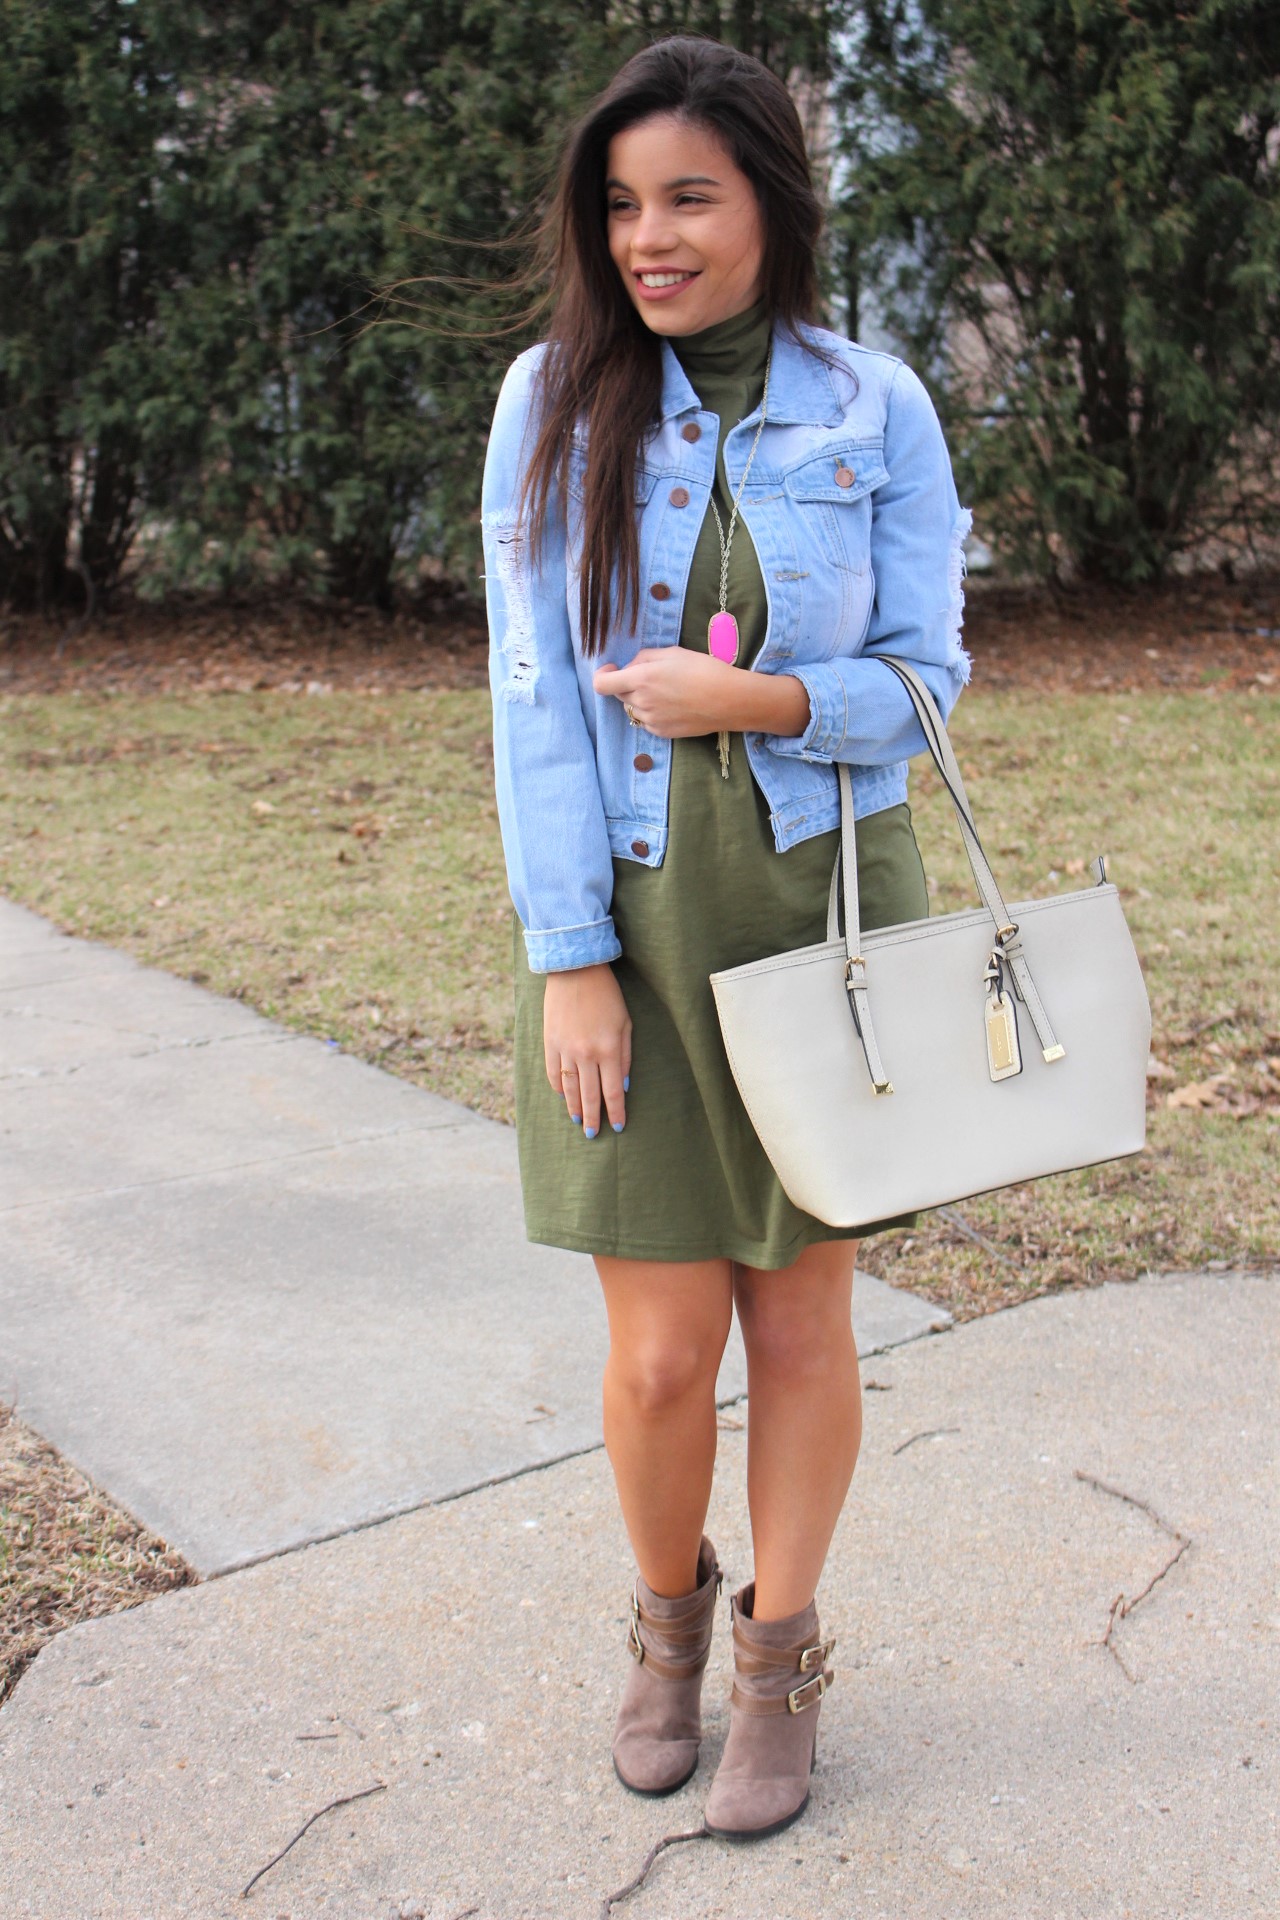 makeme chic military dress ootd jean jacket ALDO spring outfit handbag accesories ripped jean jacket perfect spring outfit by alejandra avila